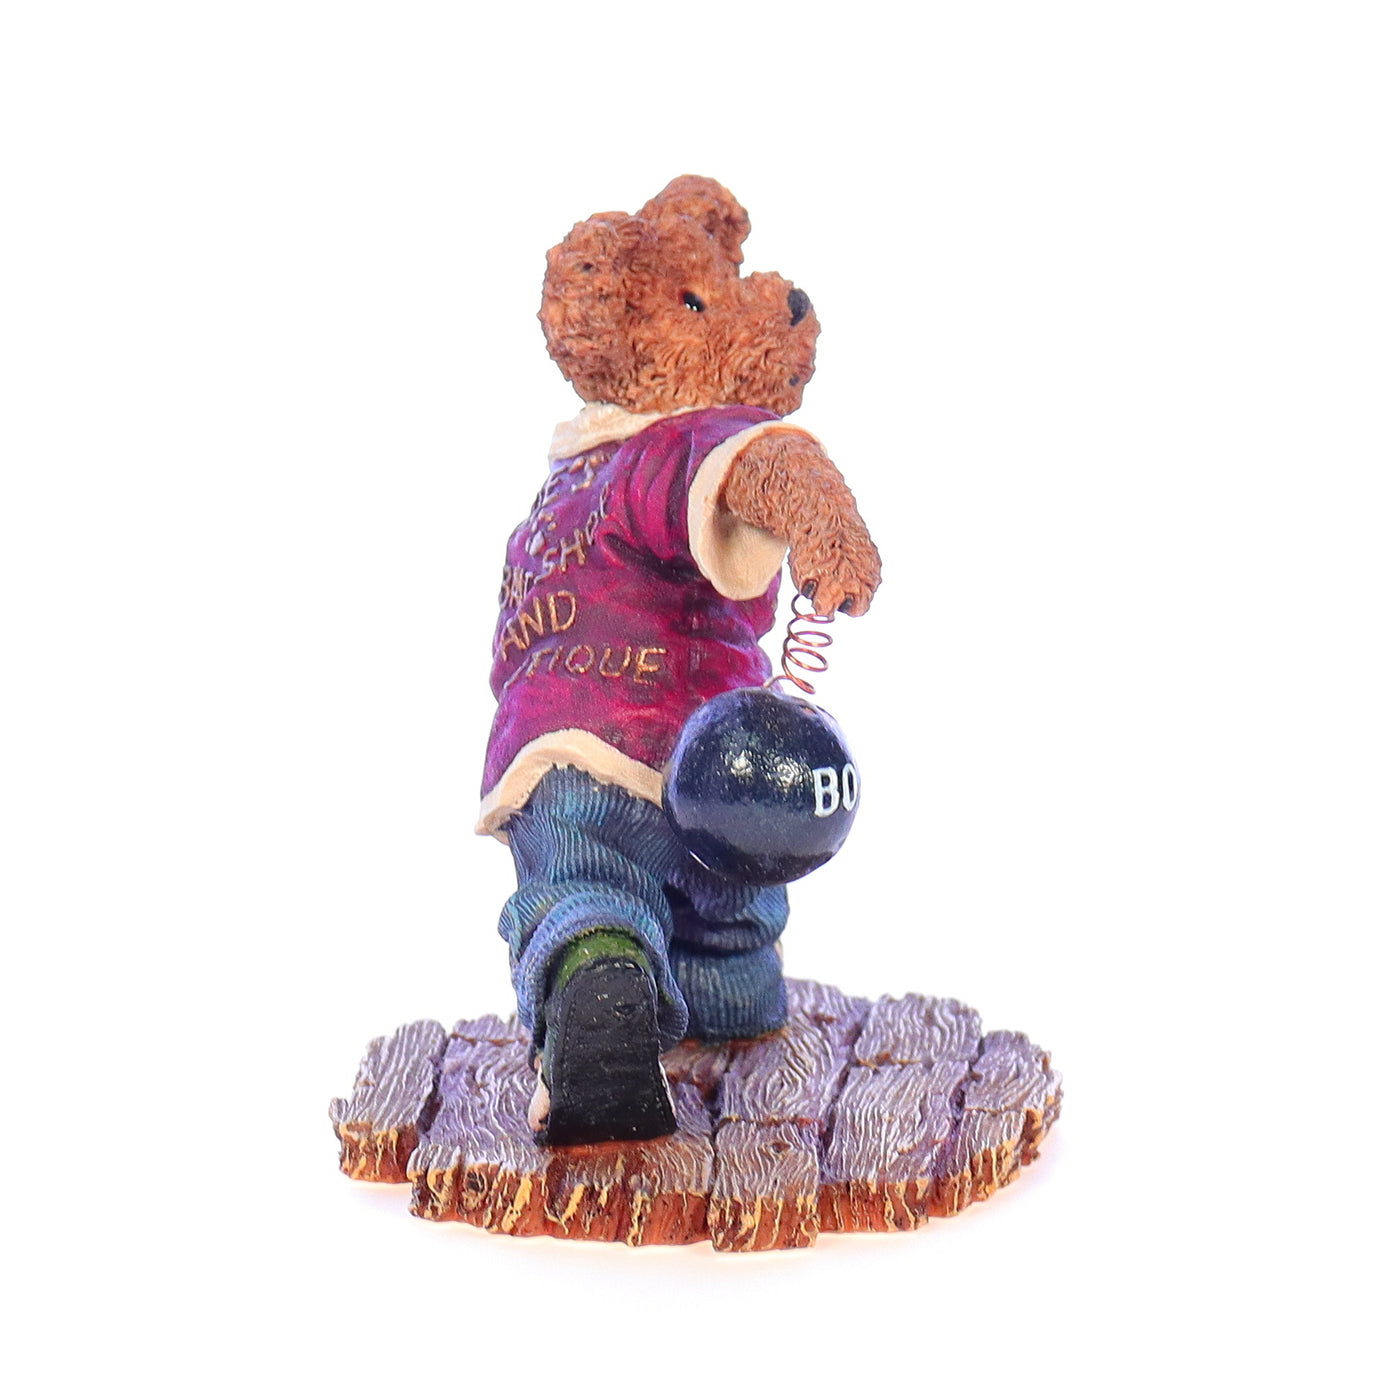 the bearstone collection 228358 strike mcspare  9 outa 10 aint bad sports figurine 2001 right